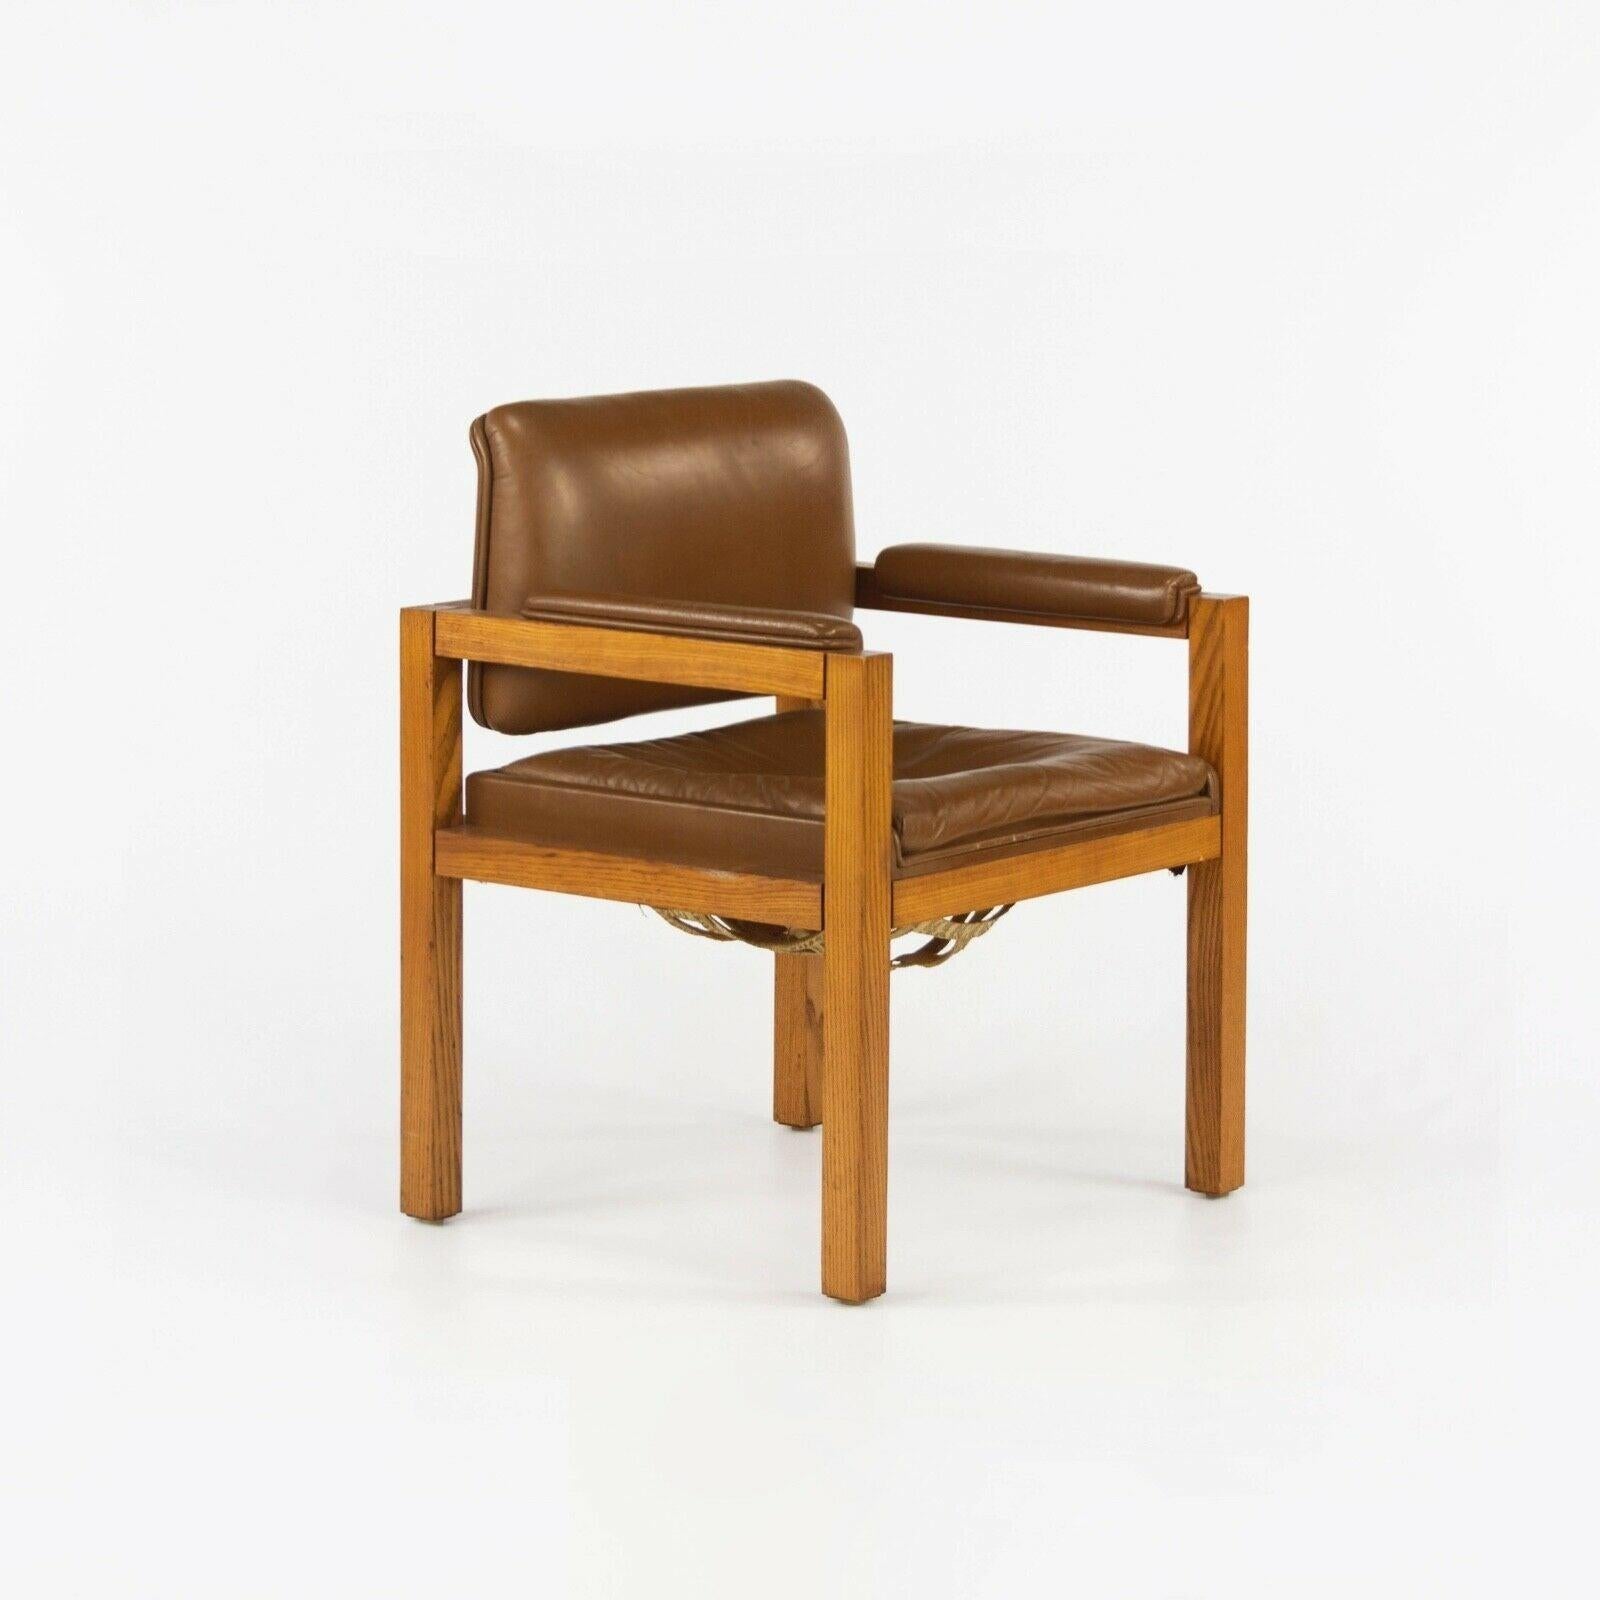 Listed for sale is a circa 1975 production oak and leather armchair designed by renowned architect and furniture designer Warren Platner. This piece was part of a series that Platner designed for CI Designs in the 1970s. CI Designs was based in